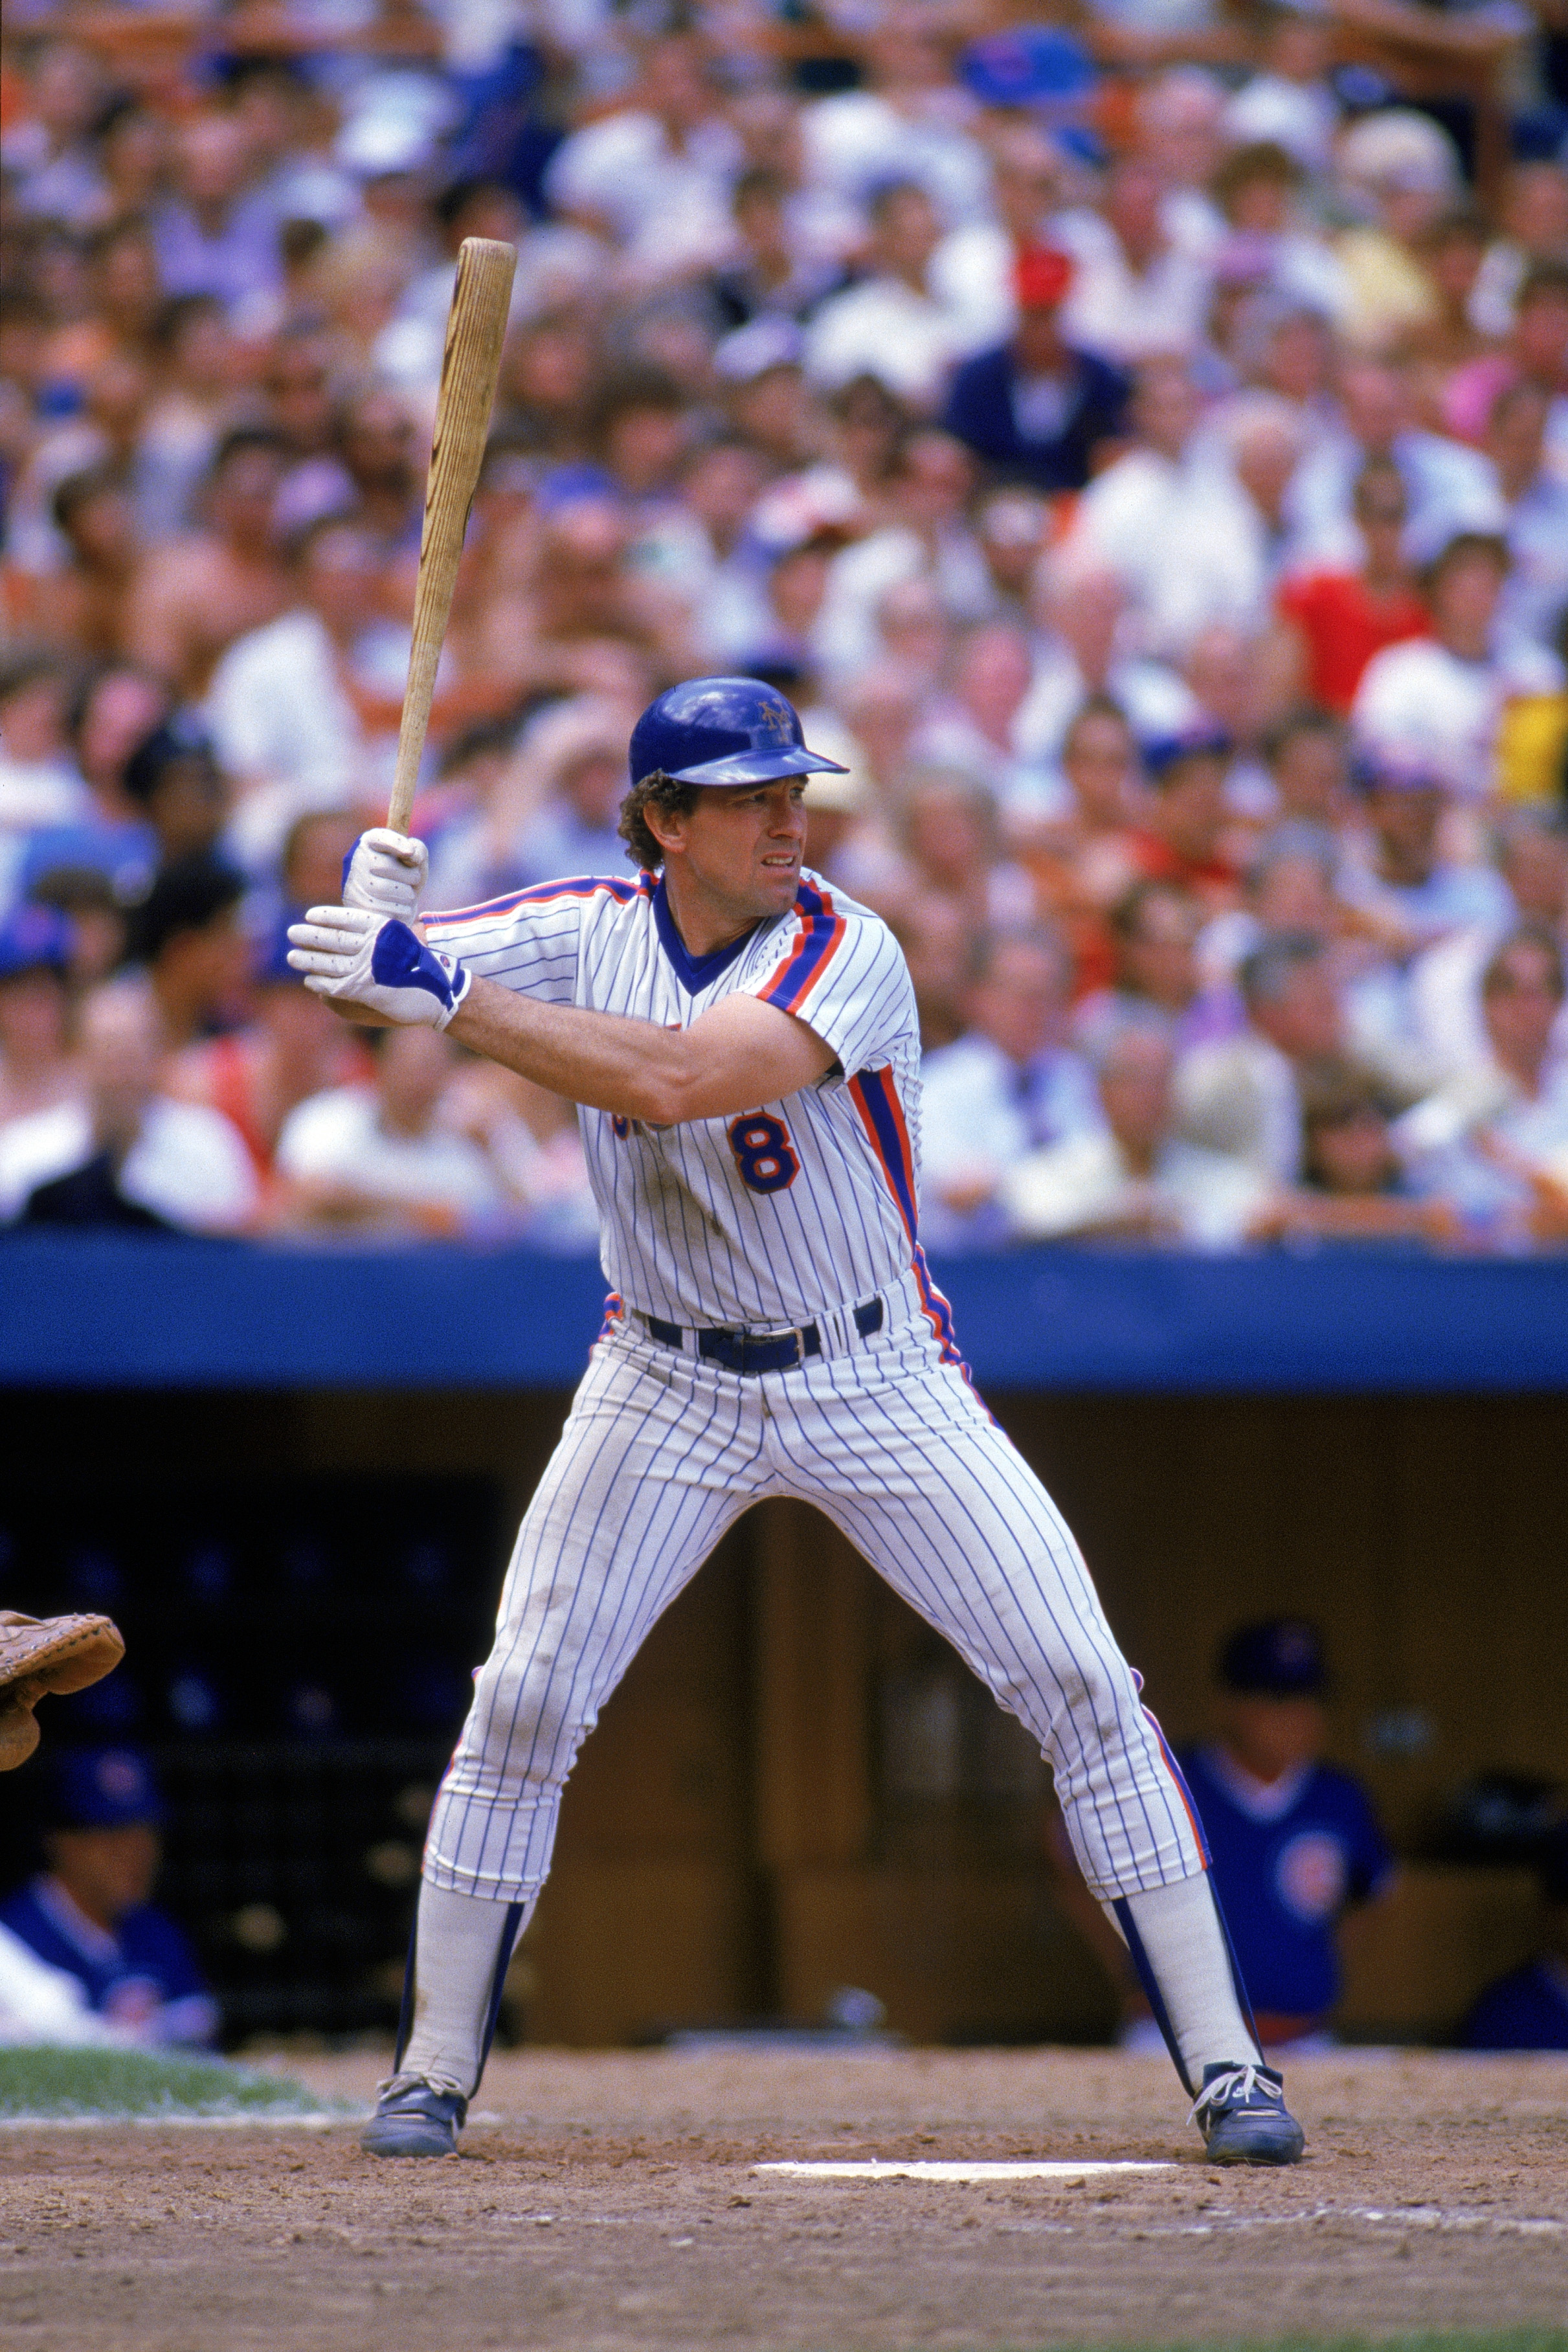 Mets Retired Numbers. On April 15, 1997 in a historic…